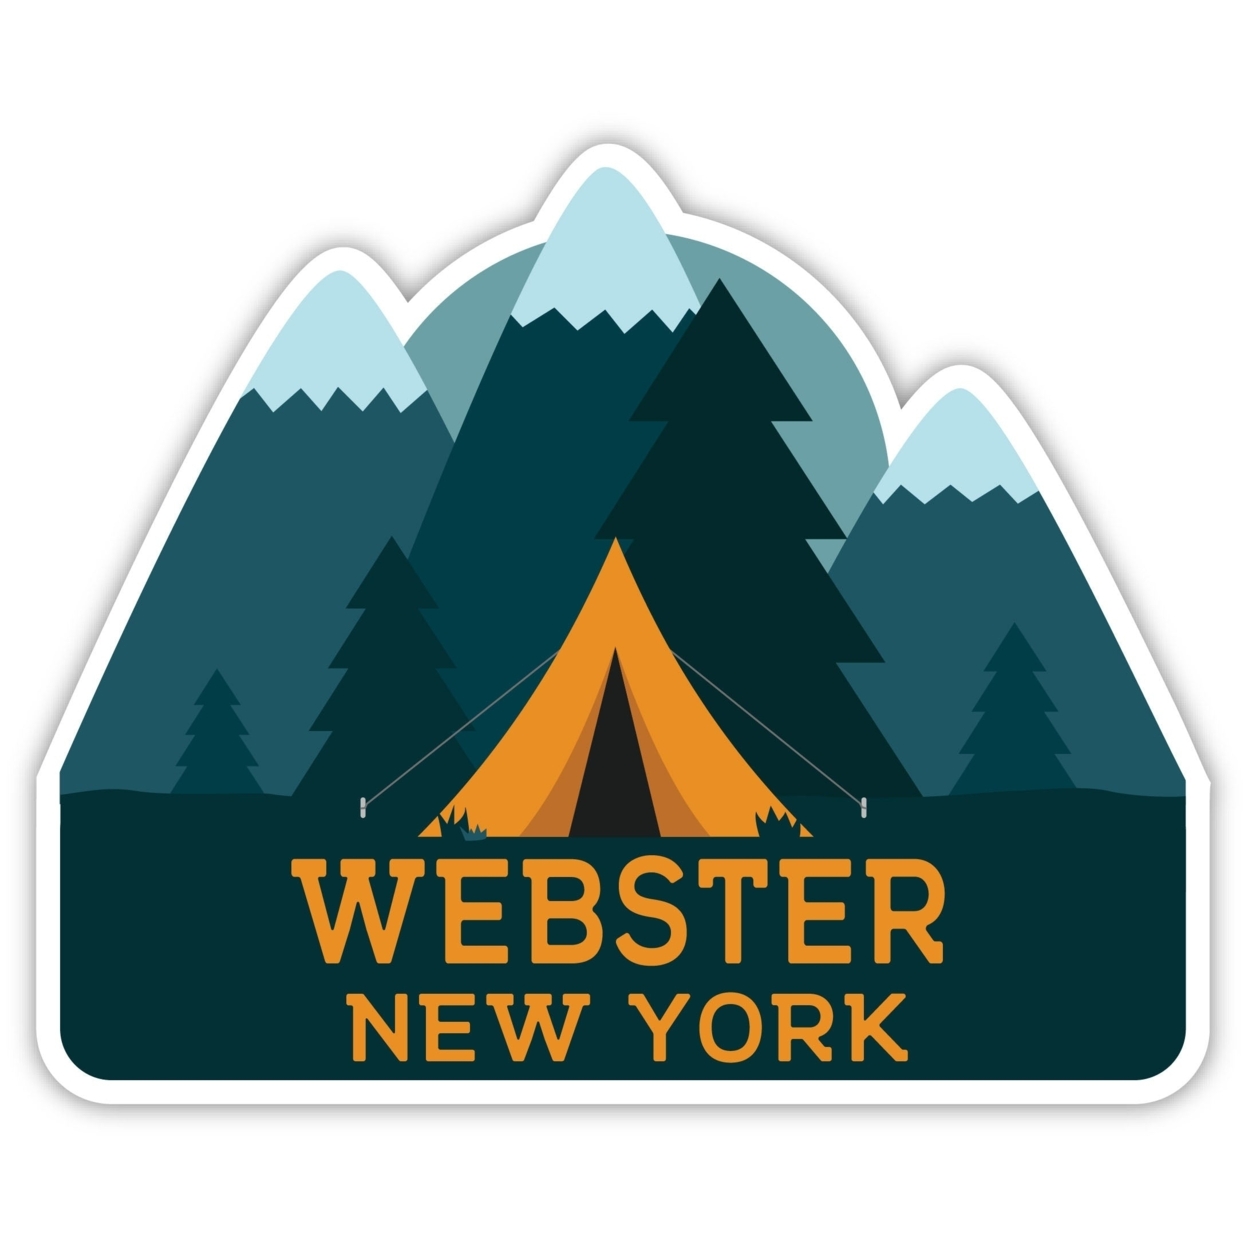 Webster New York Souvenir Decorative Stickers (Choose Theme And Size) - Single Unit, 4-Inch, Adventures Awaits